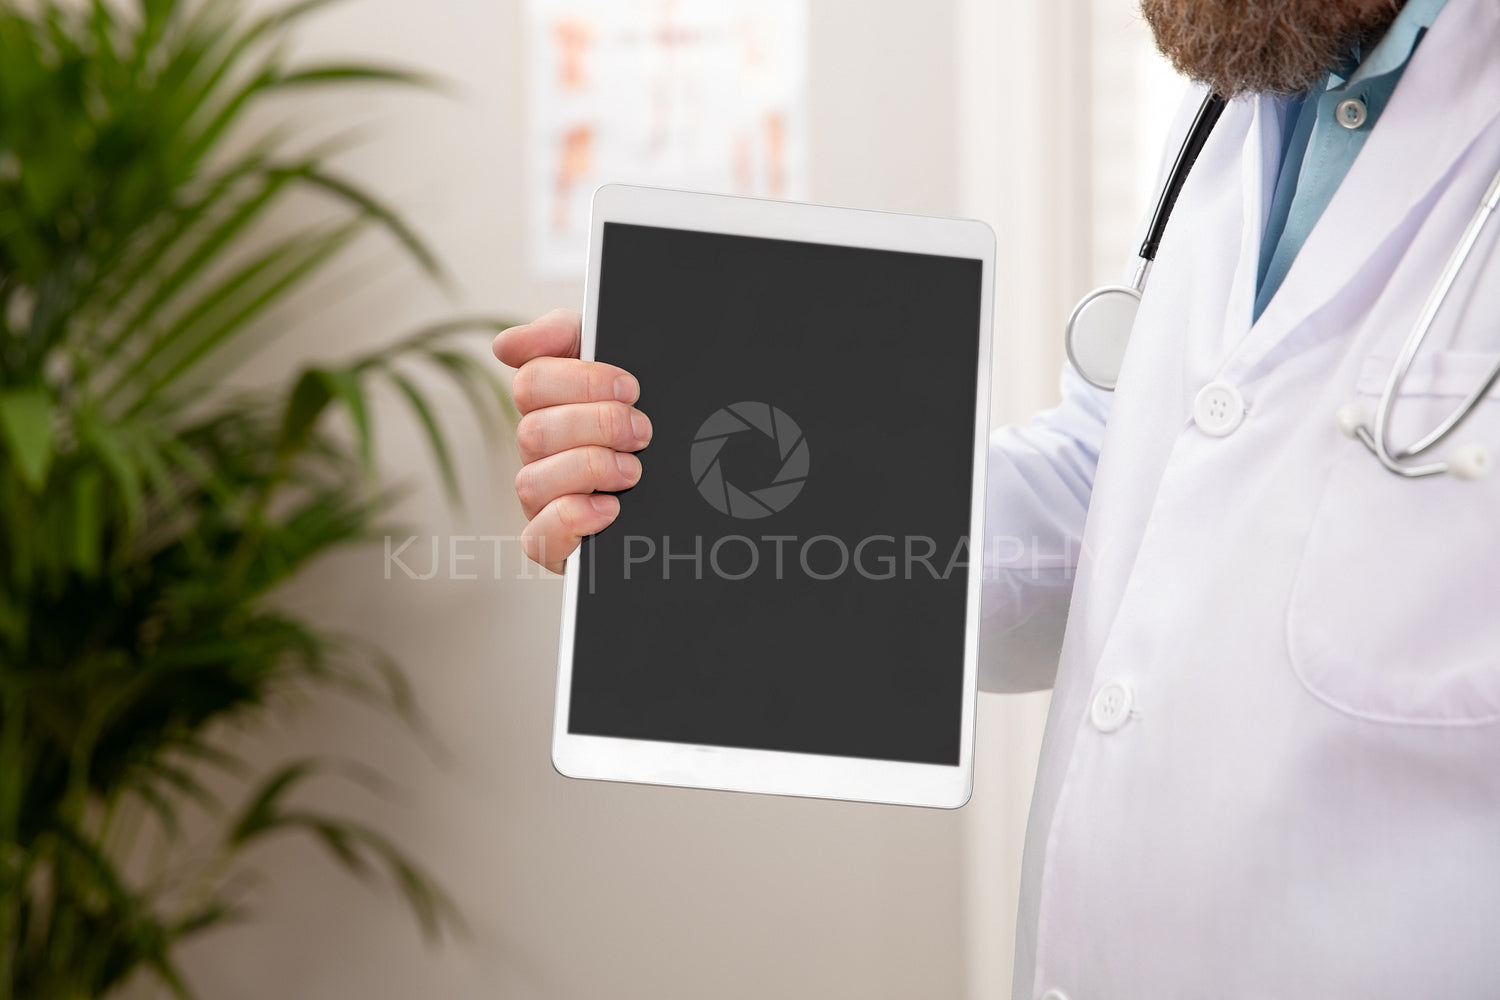 Adult male doctor showing a digital image or report on a tablet